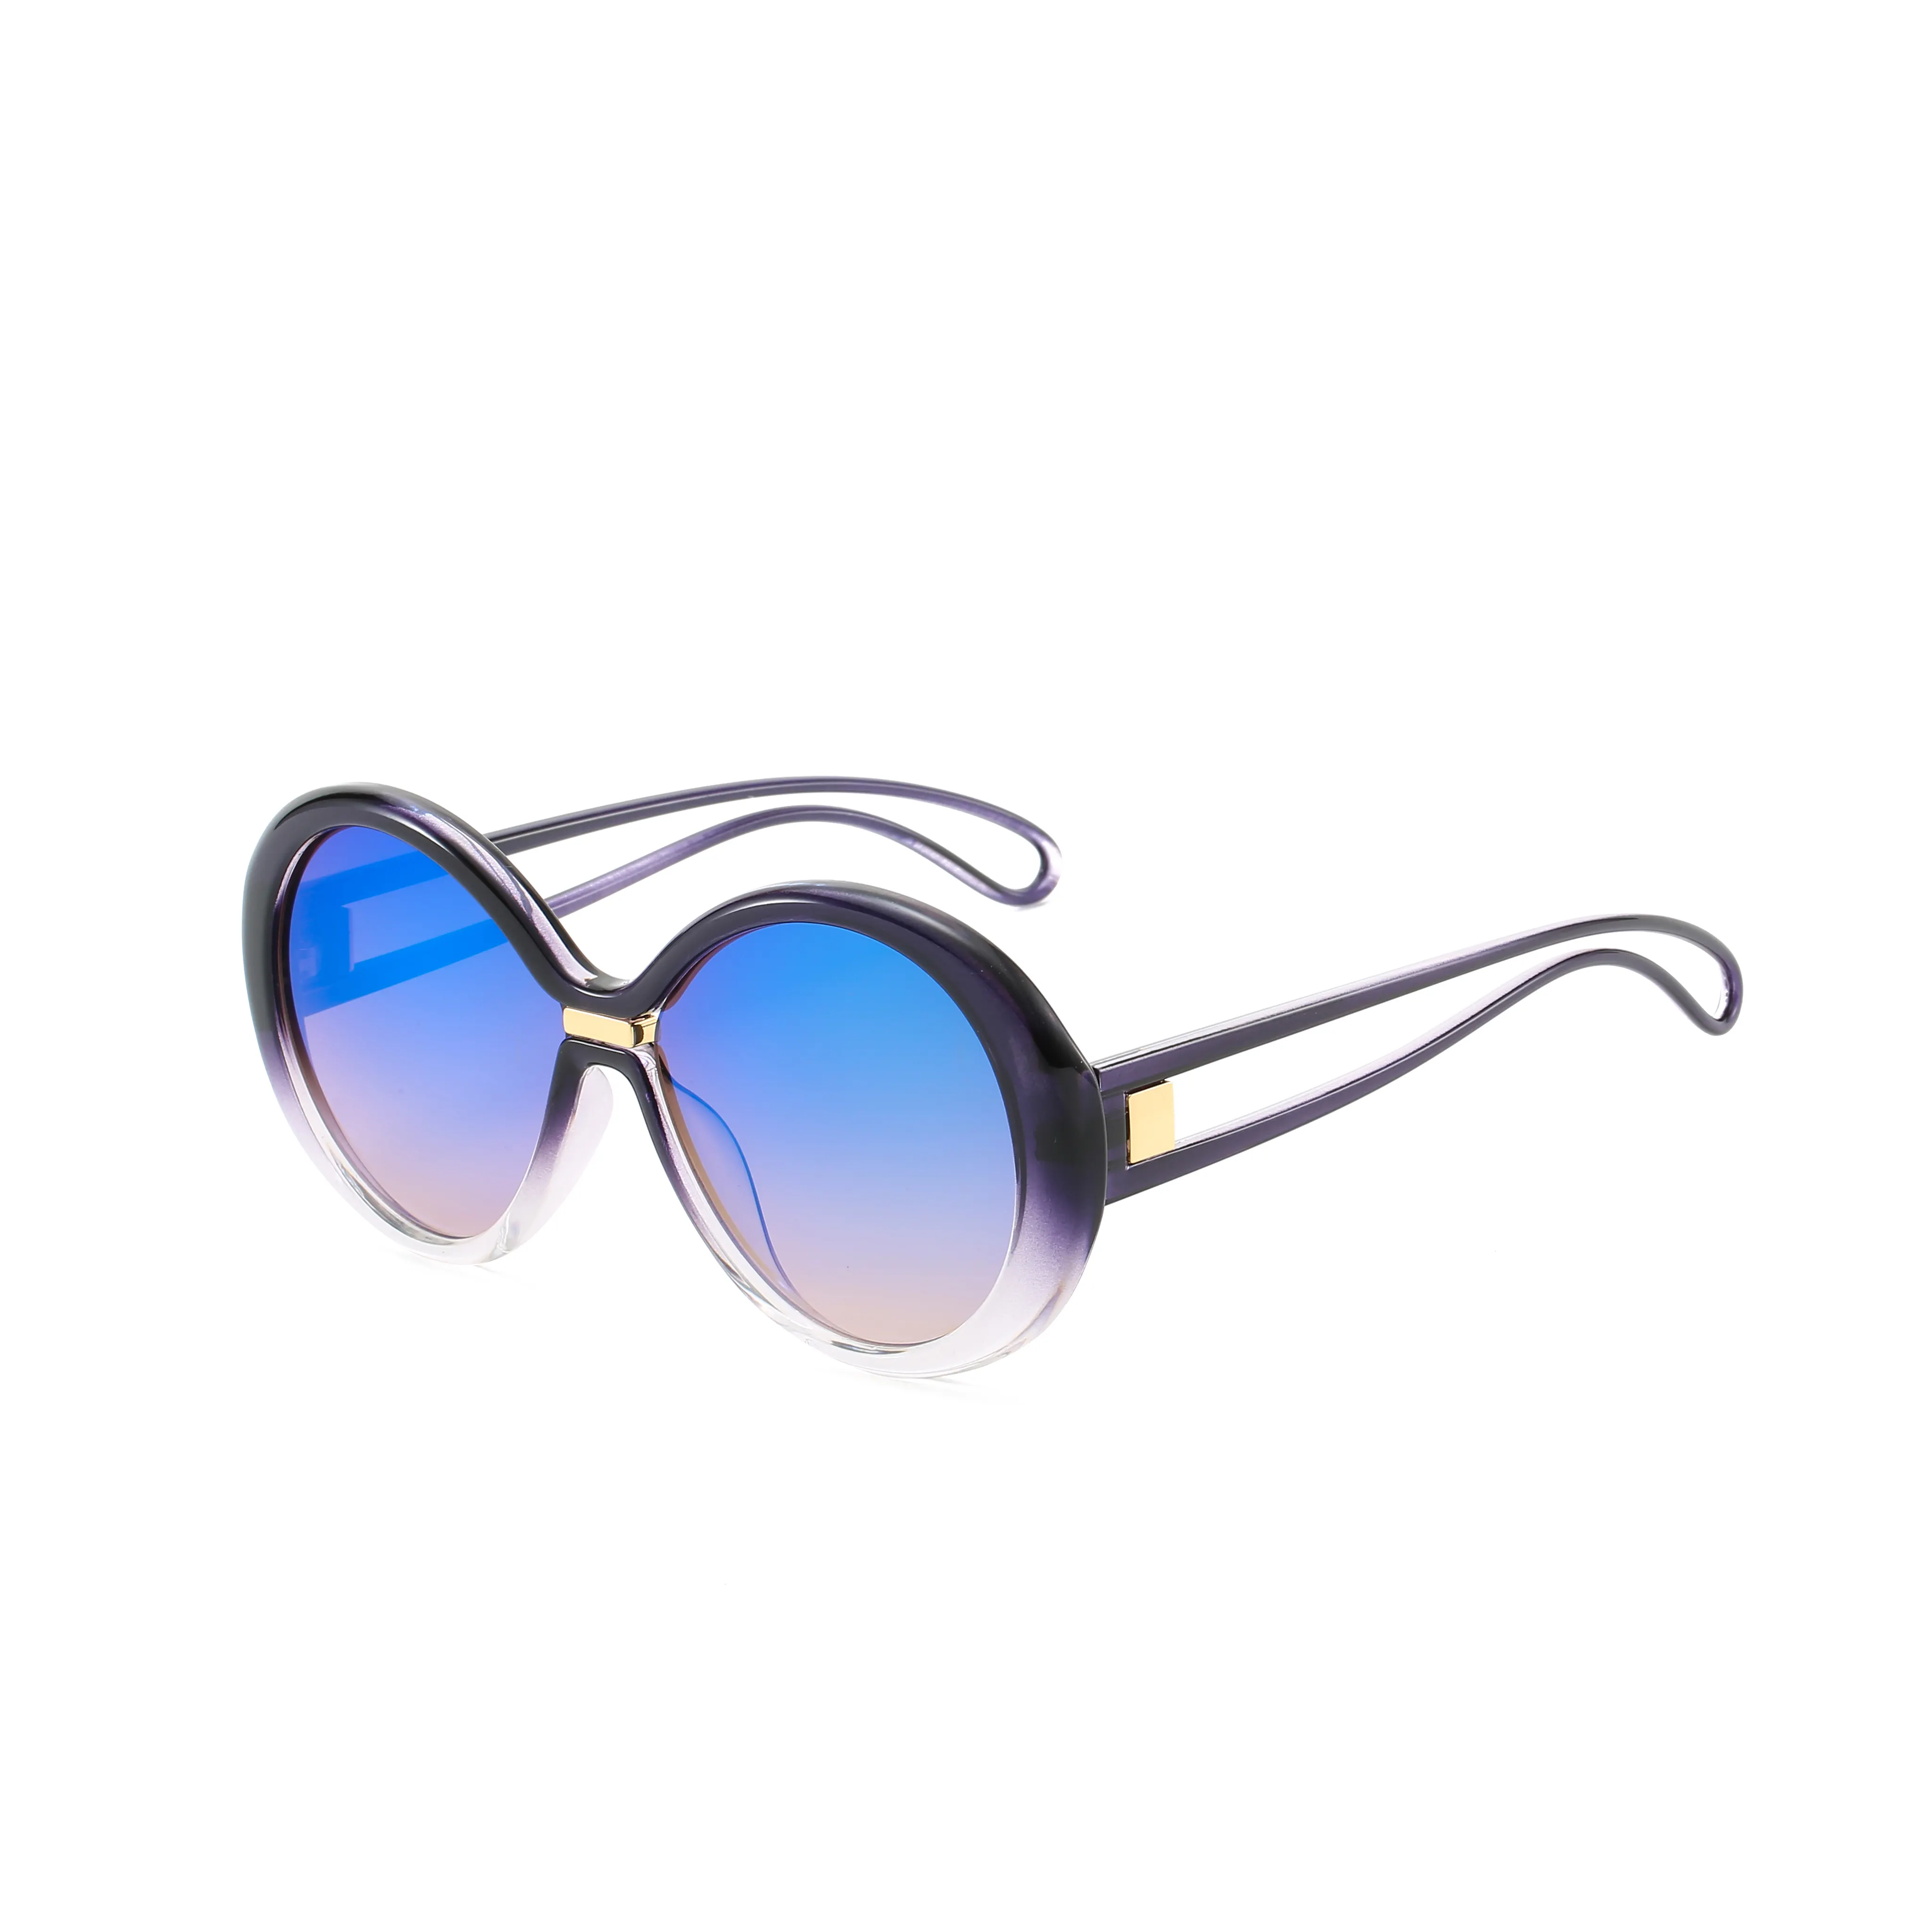 New Arrival Fashion High Quality Candy Color Women and Men Metal Round Sunglasses